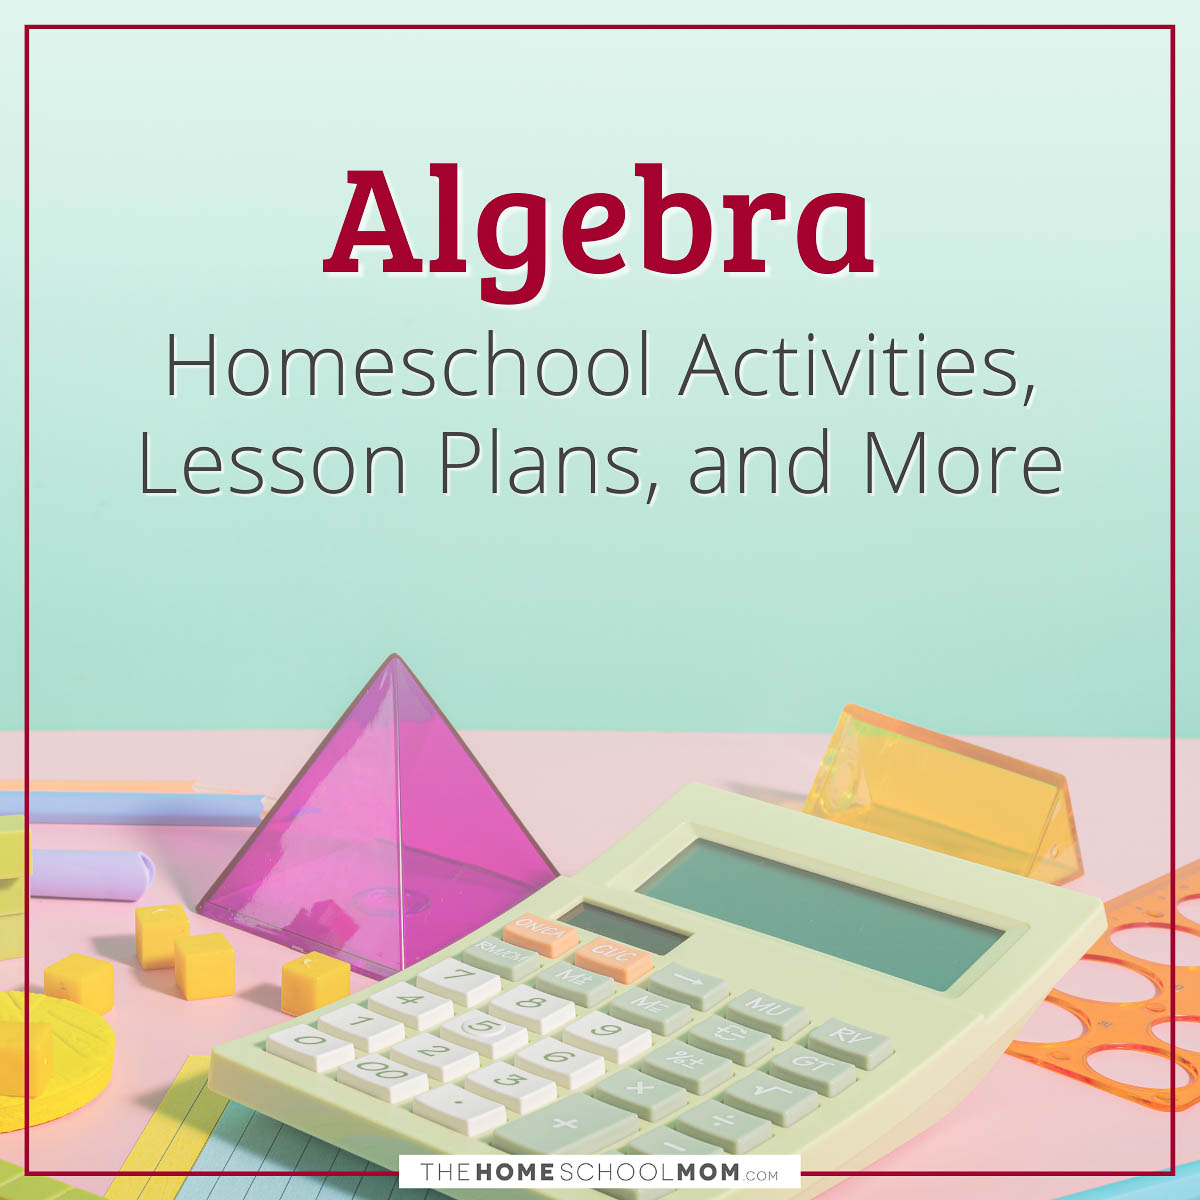 Algebra Homeschool Activities, Lesson Plans, and More from TheHomeschoolMom.com